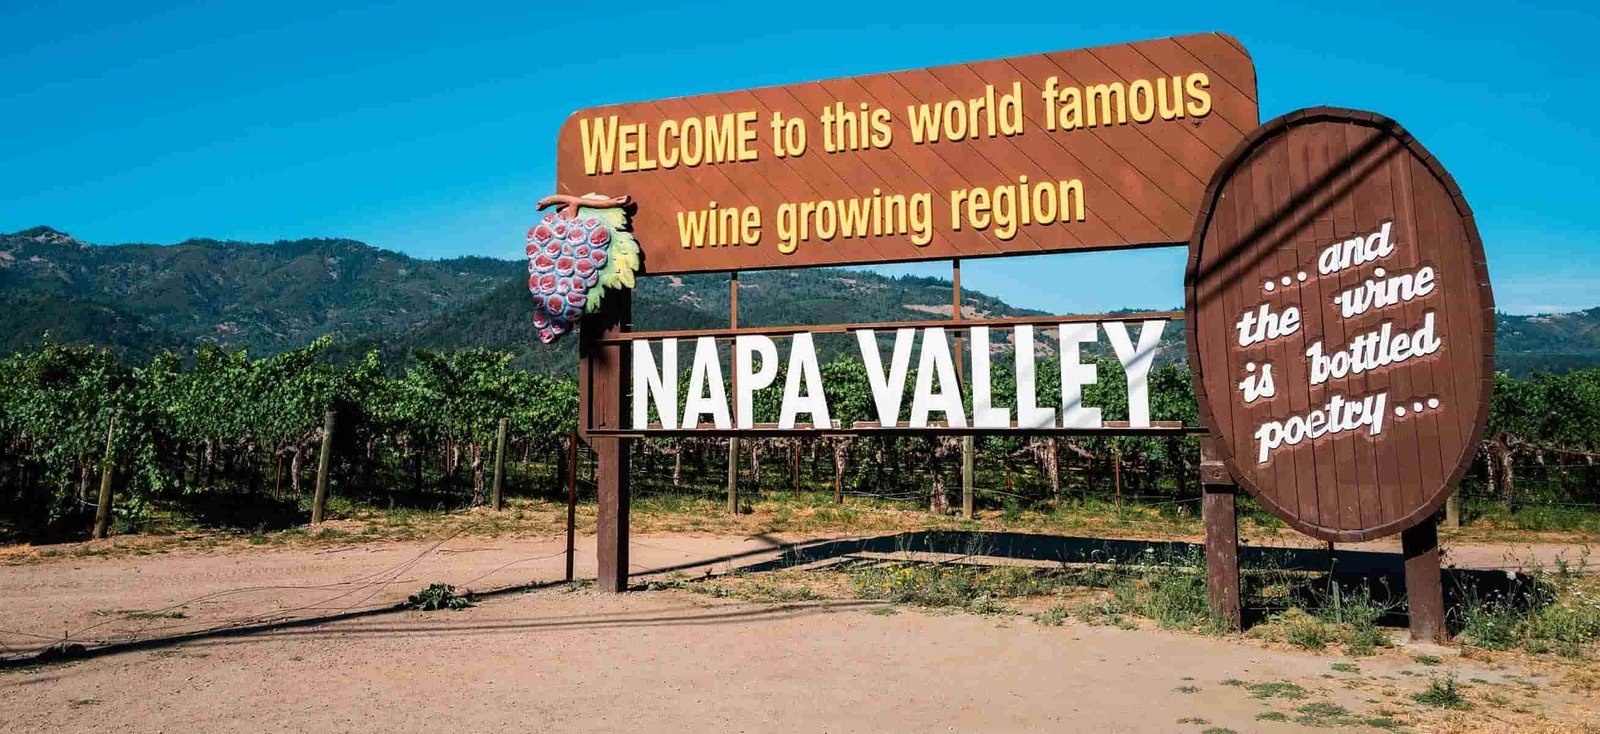 Napa valley limo & executive black car services at affordable prices